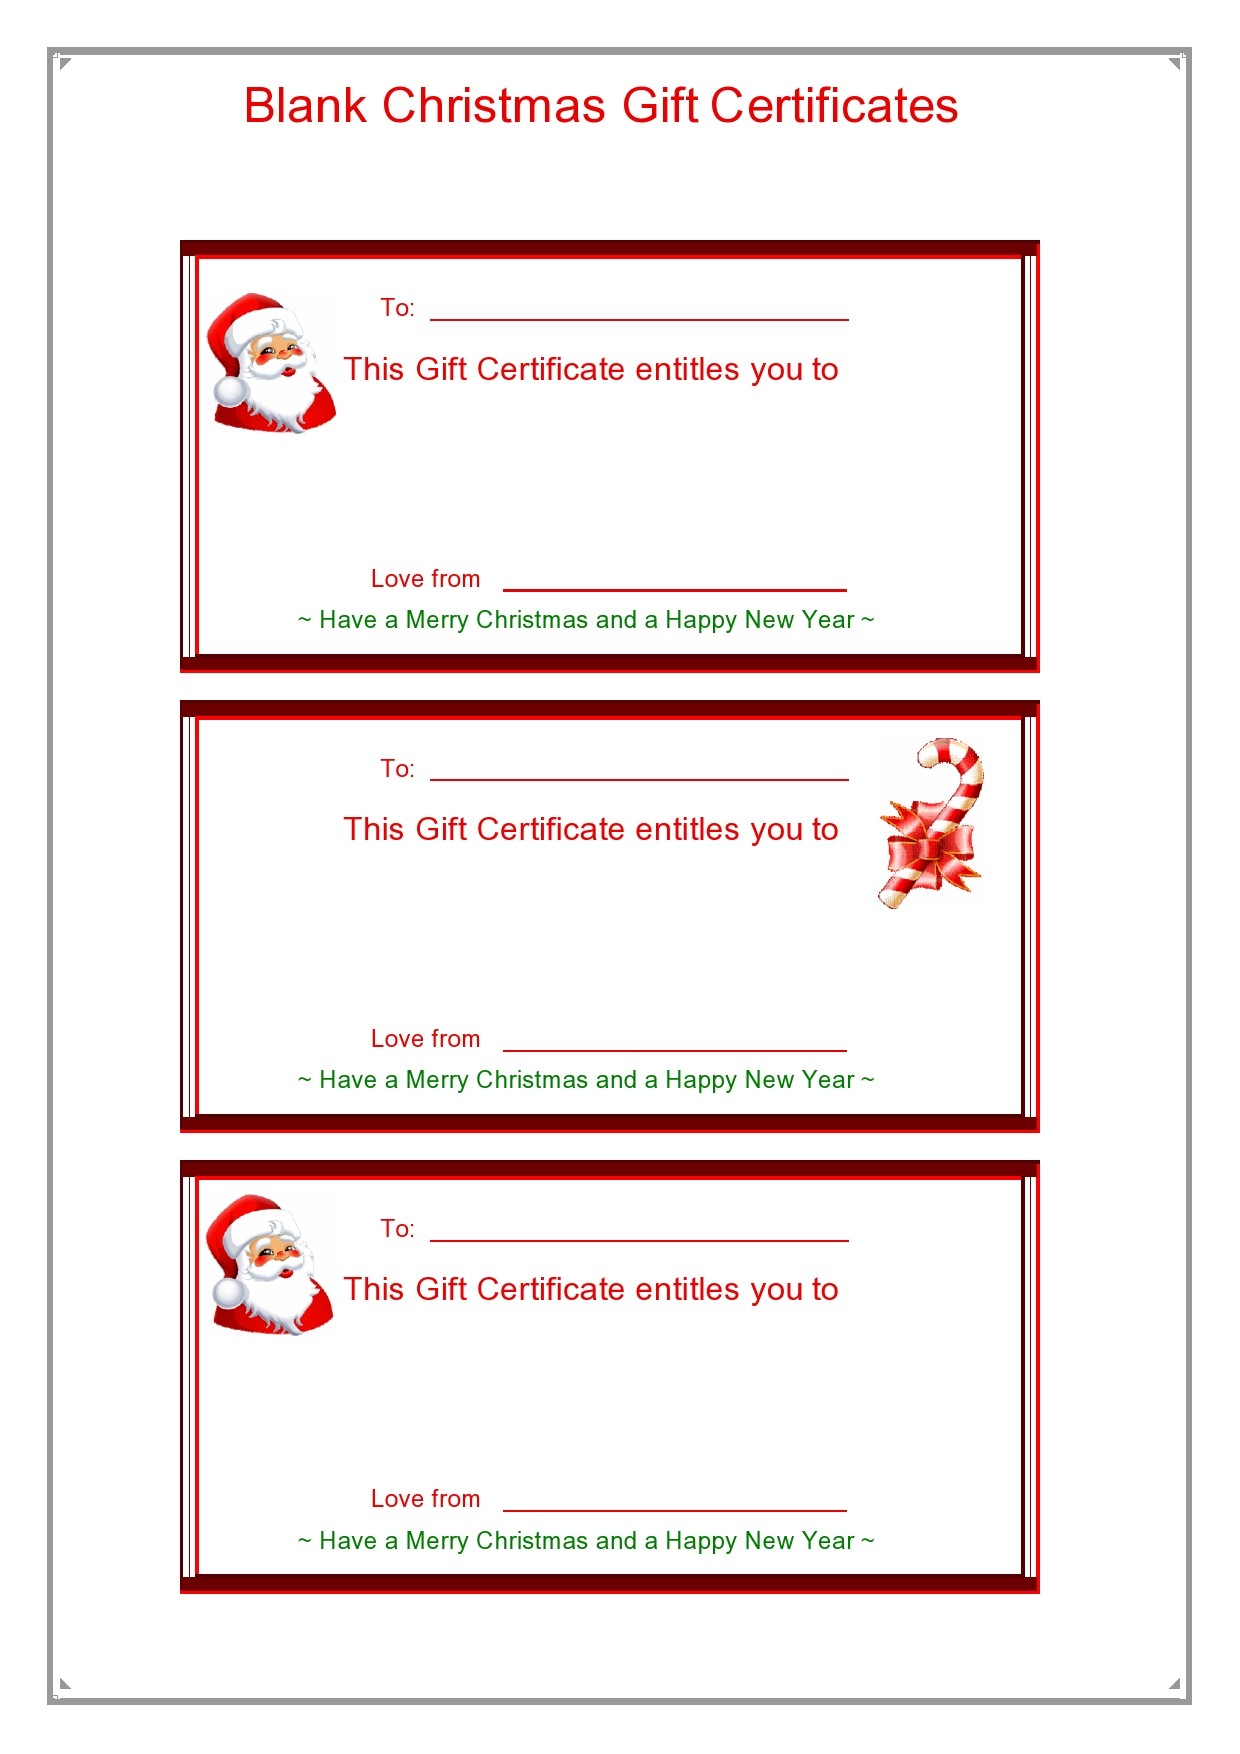 39 Christmas Gift Certificate Templates Free TemplateLab